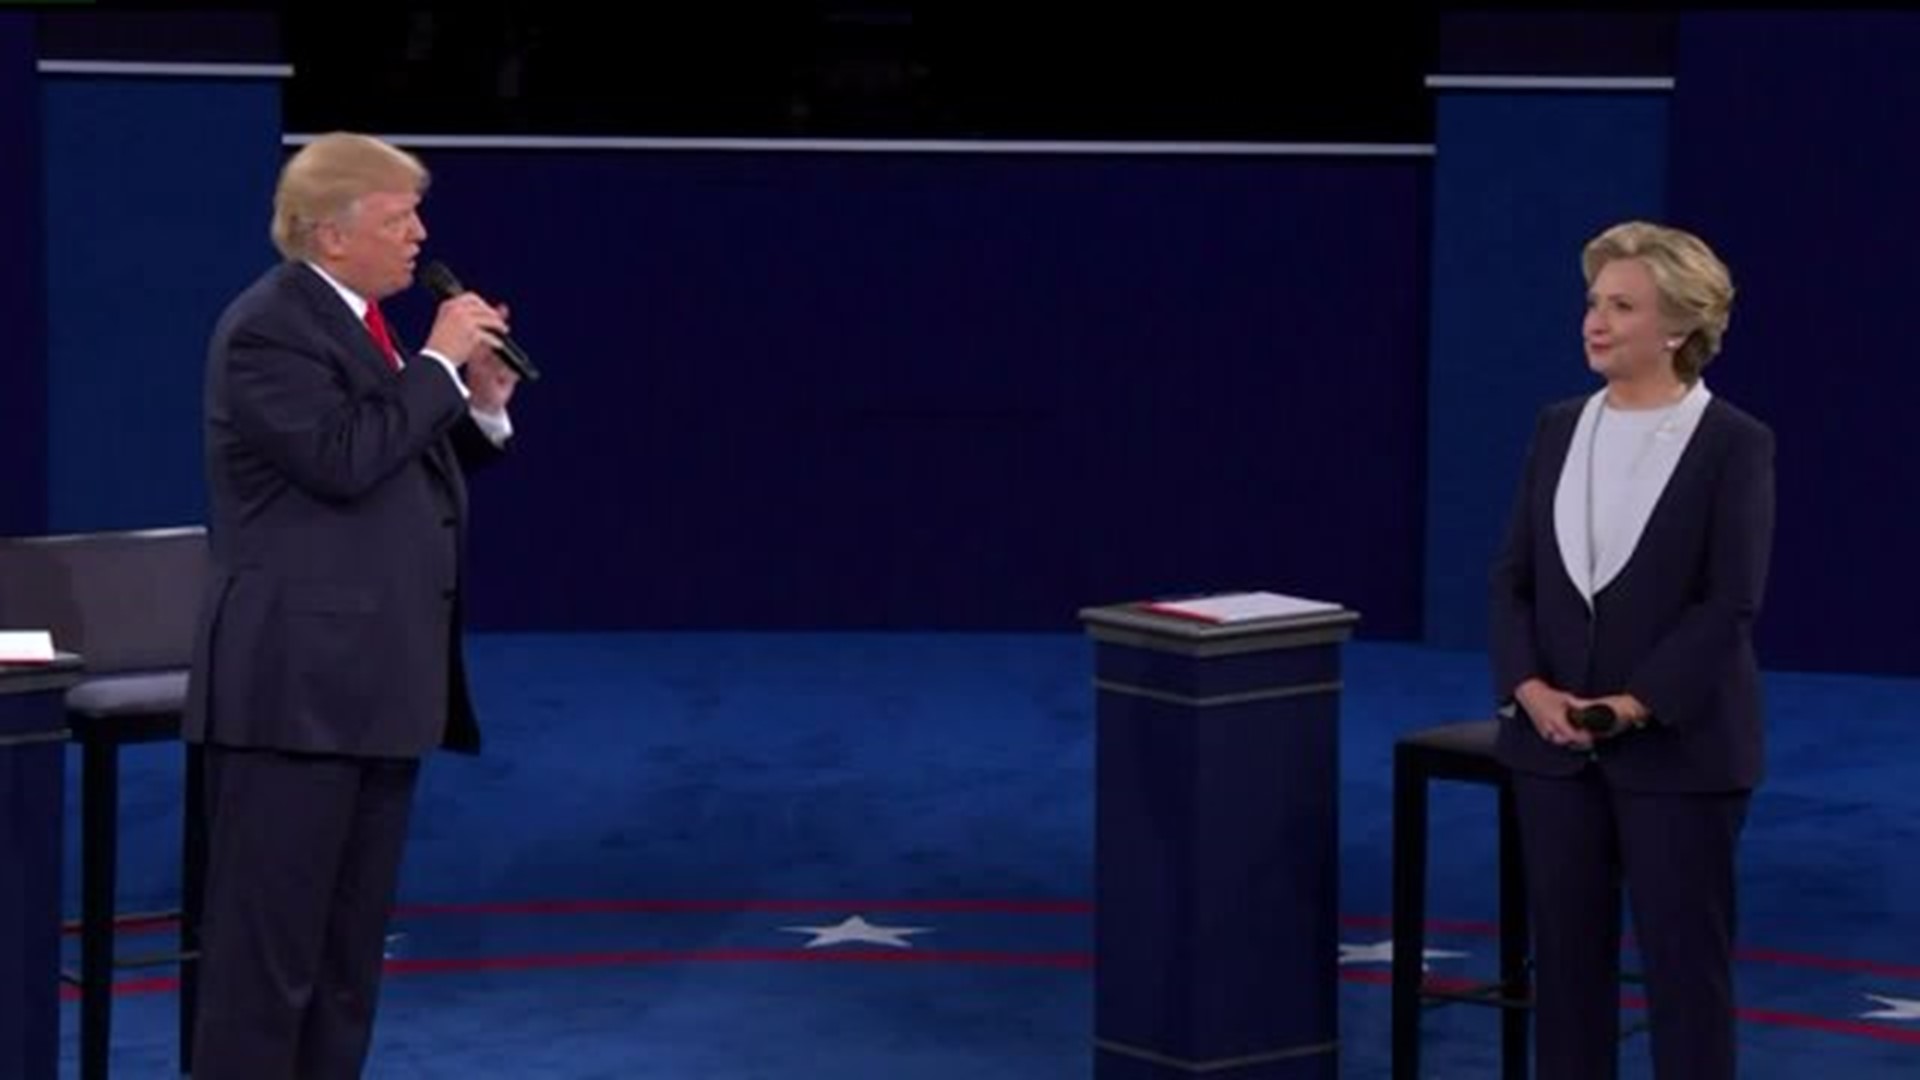 Both presidential nominees will be making campaign stops after their 2nd debate last night